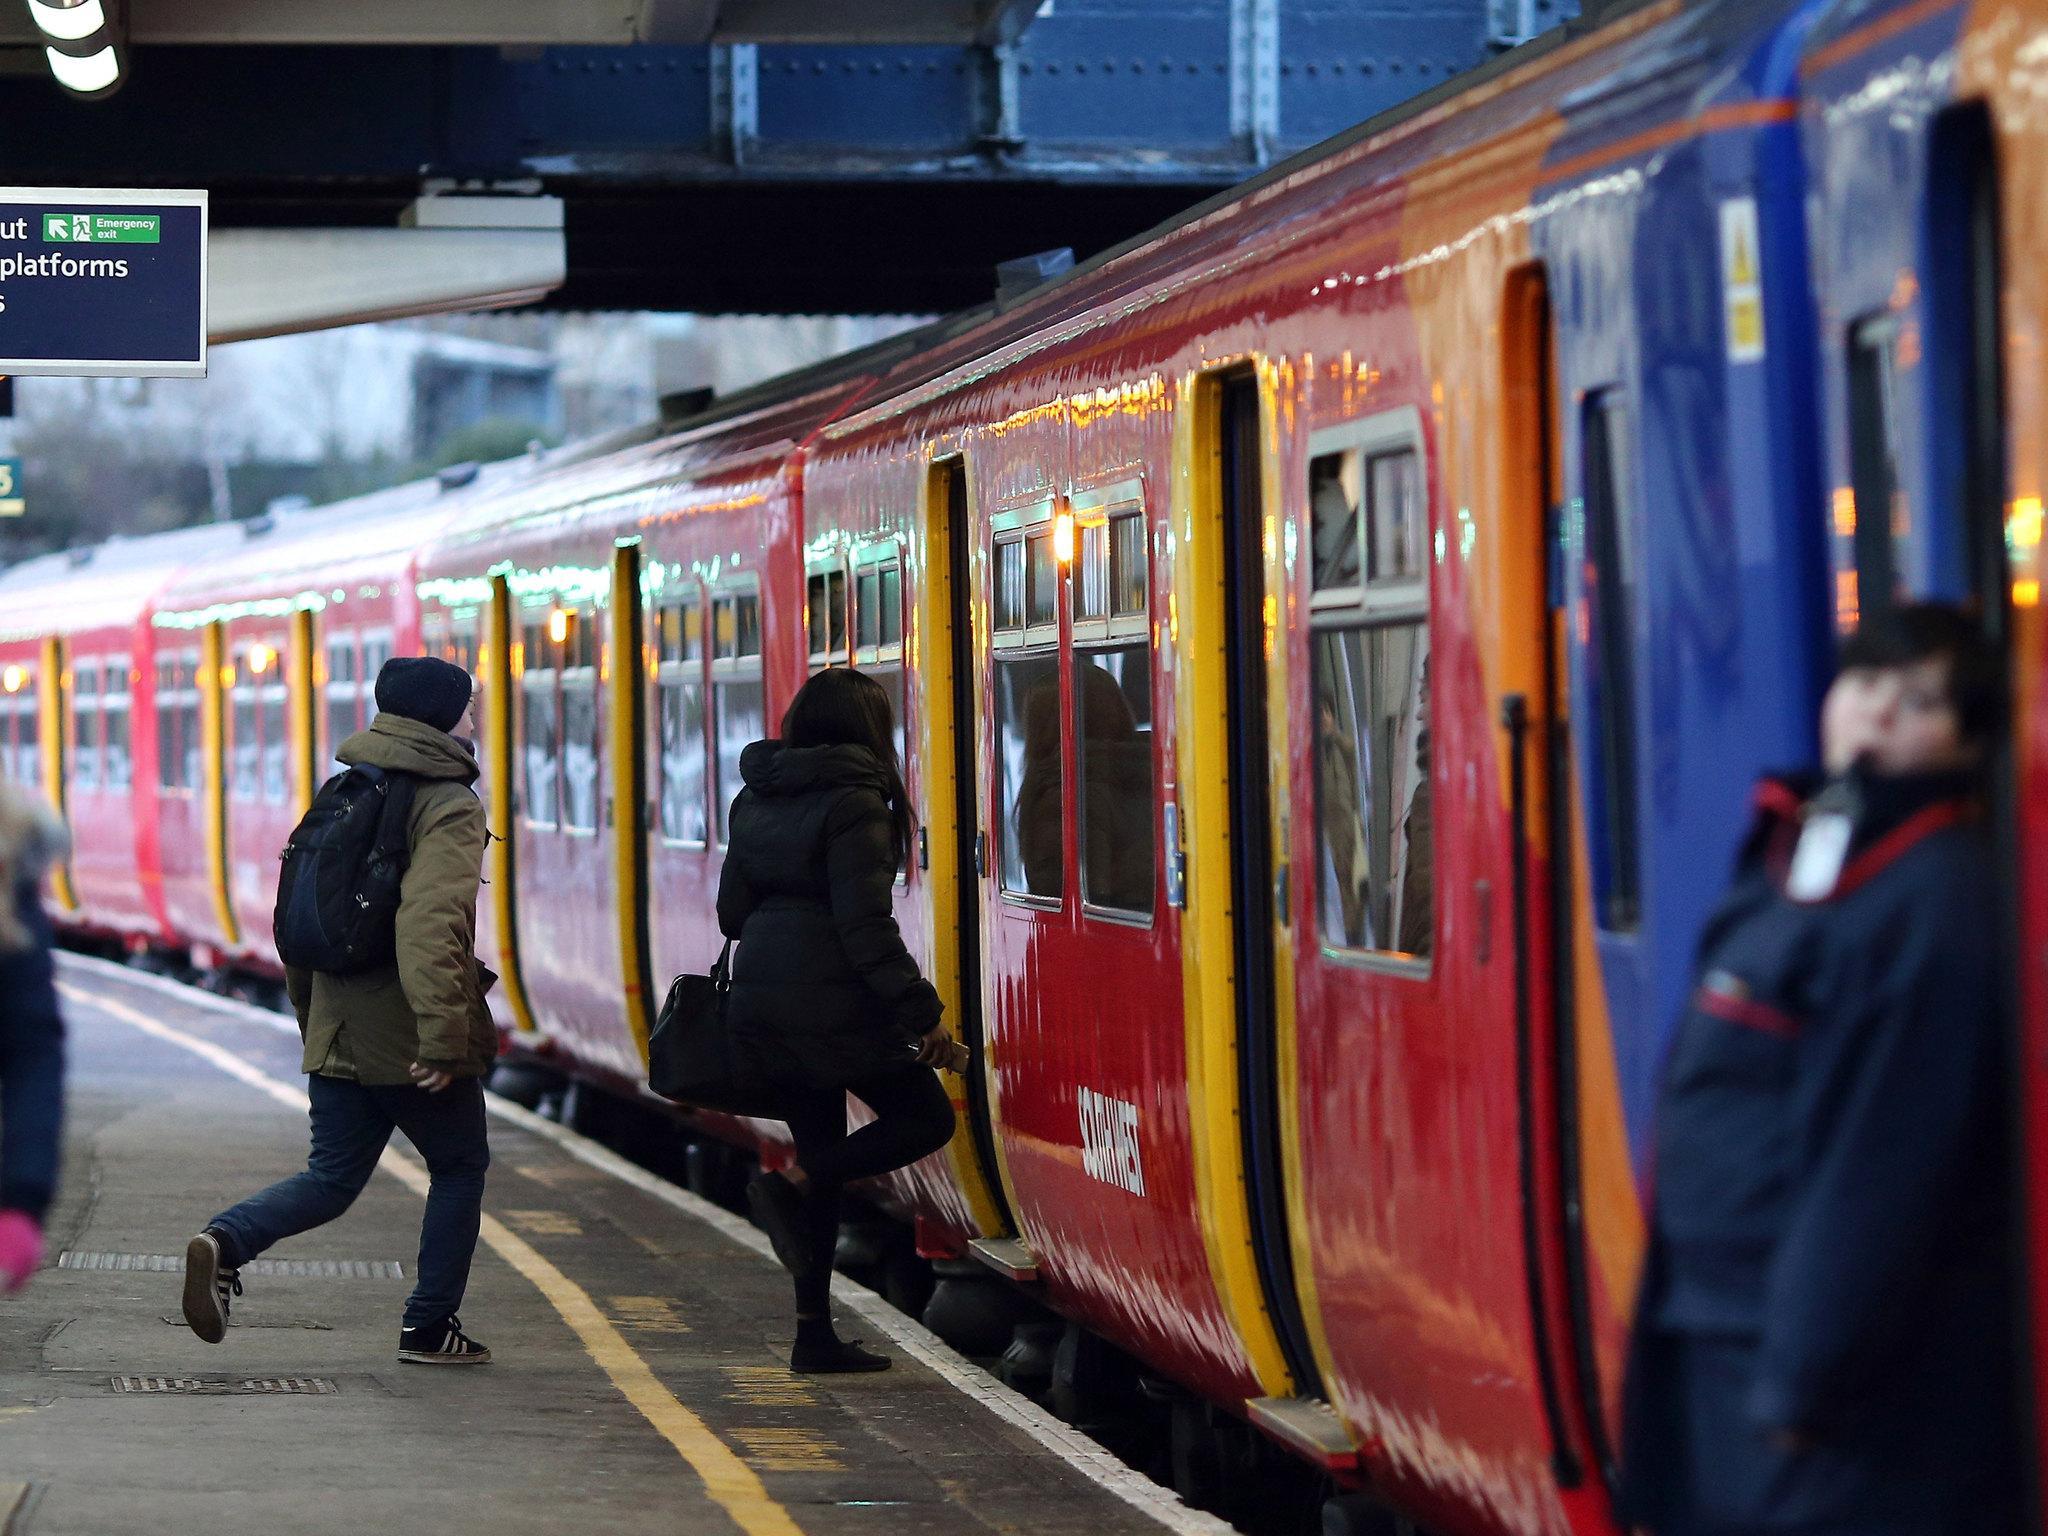 LONDON, ENGLAND - JANUARY 02: Passengers run to board a train at Clapham Junction on January 2, 2015 in London, England. Increased rail fares averaging 2.5% come into effect today, pushing the cost of some commuters annual rail fares to more than £5,000.